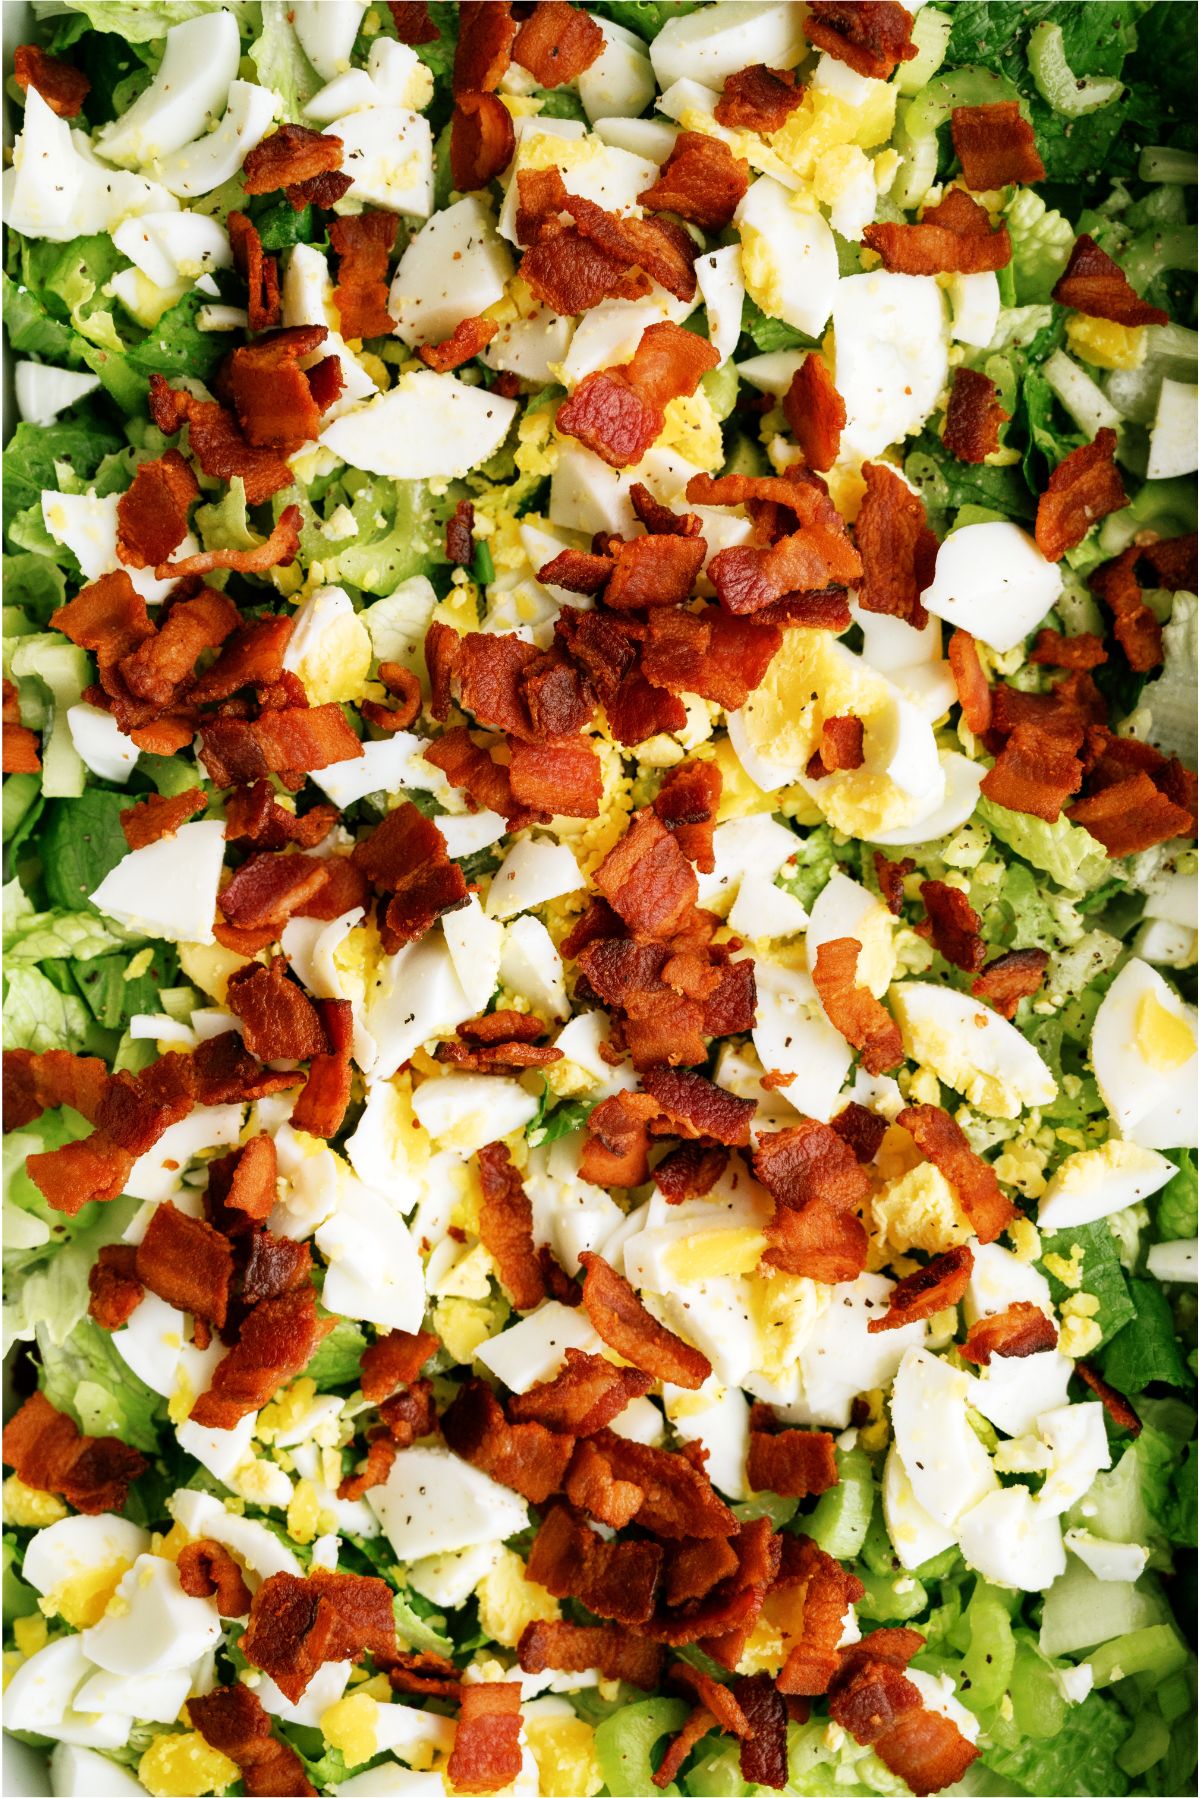 Chopped bacon and eggs added on top of celery layer